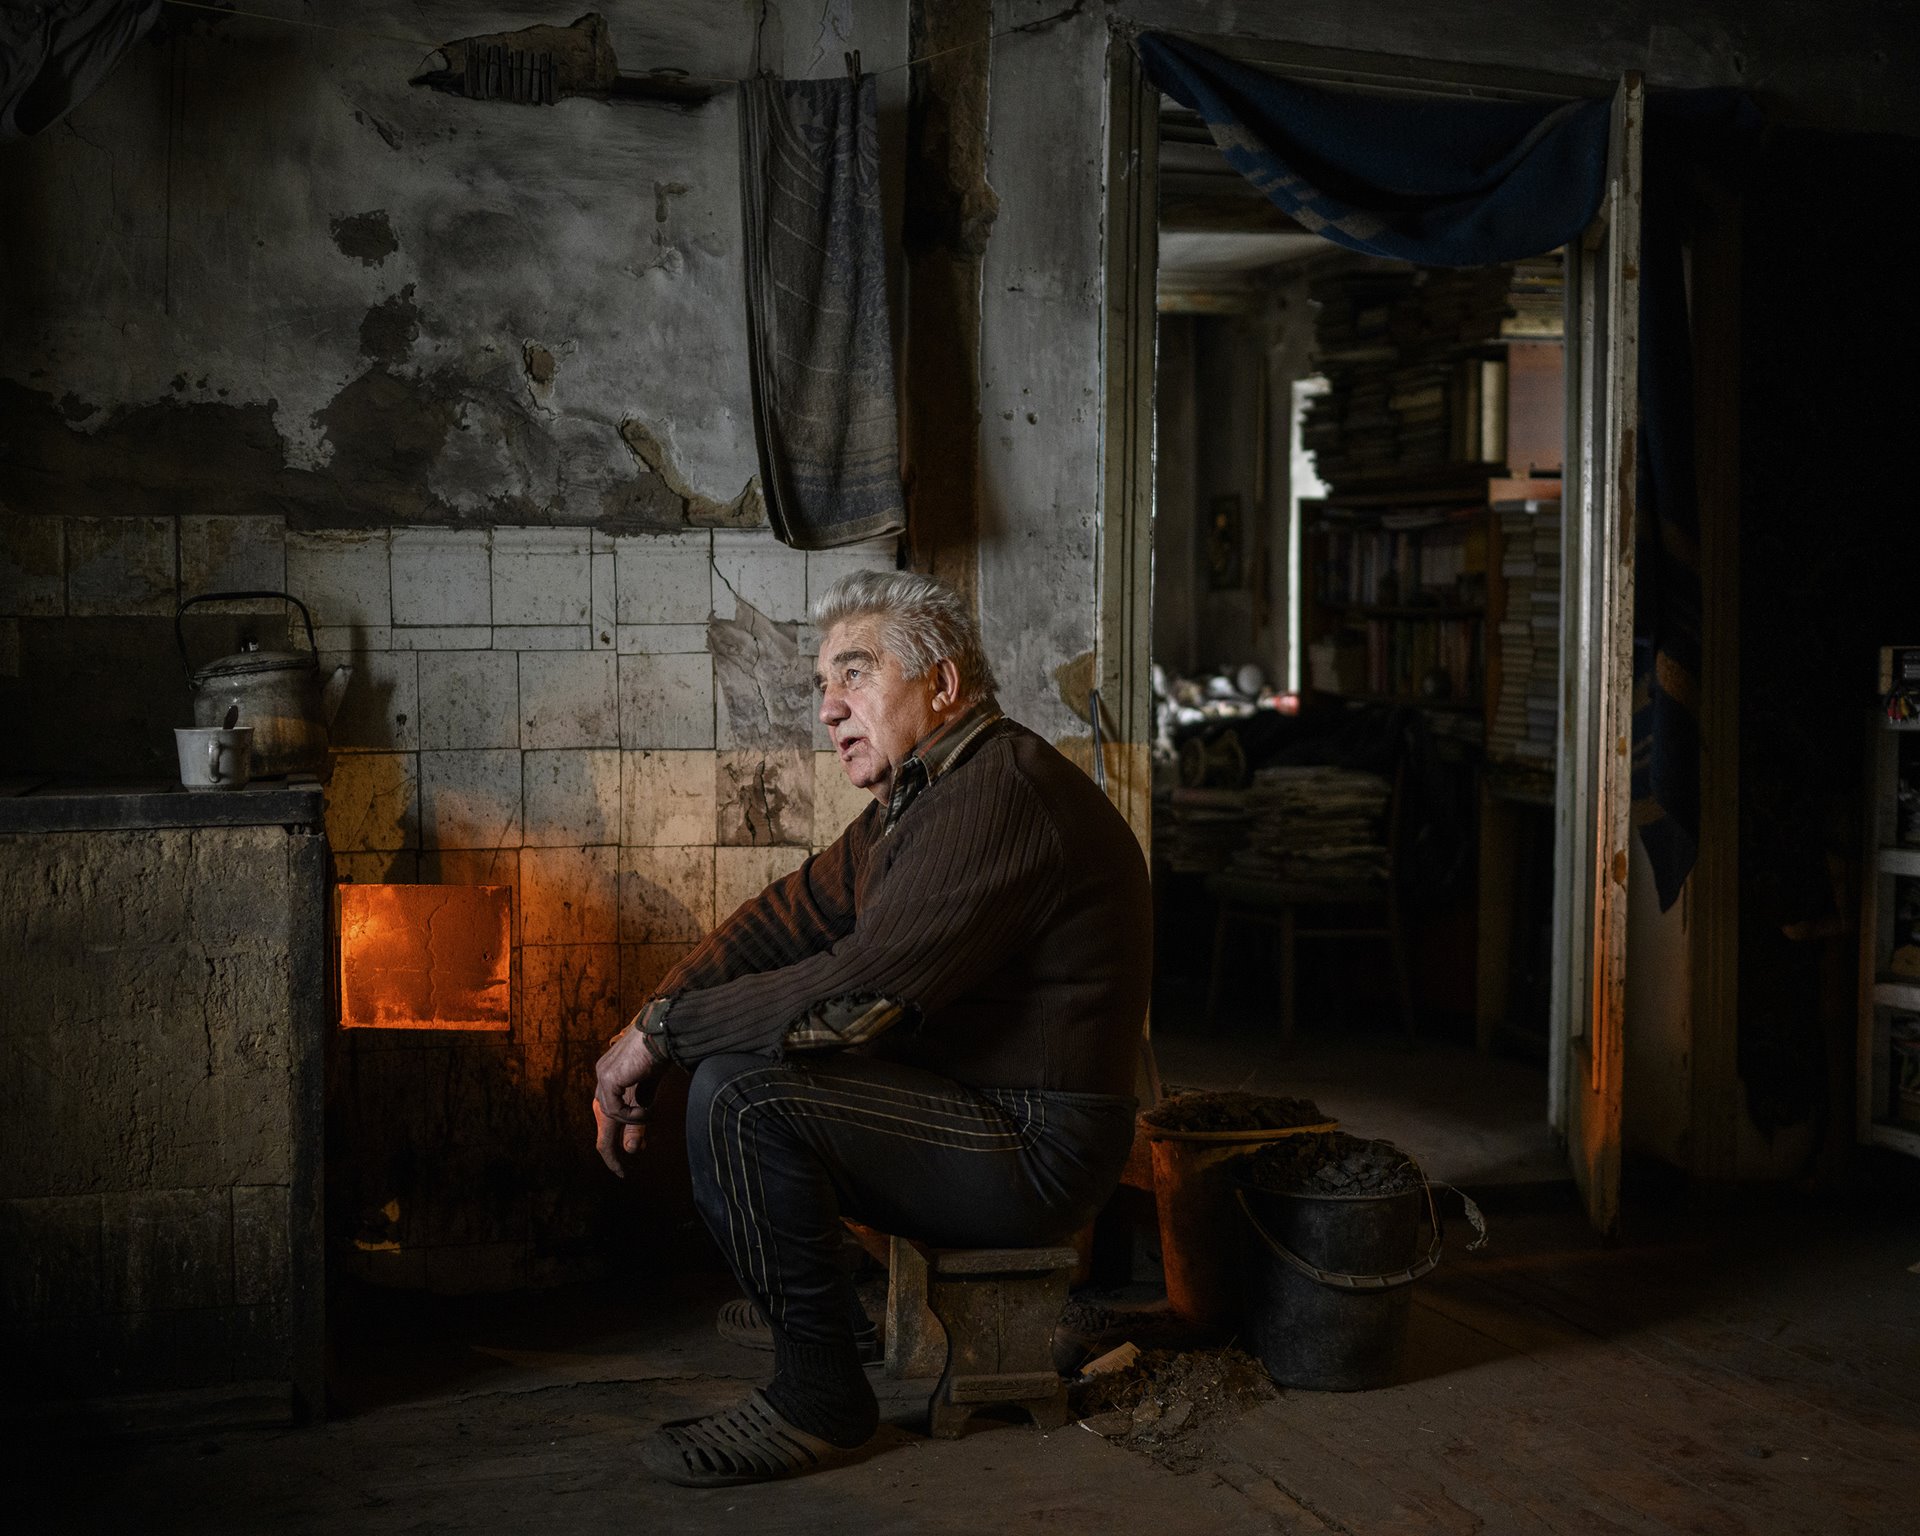 Alexander Ivanovich sits in his home, in Avdiivka, Donbas, Ukraine, a few hundred meters from the front line of the conflict between Ukrainian and separatist forces. His home had been hit by shells five times.